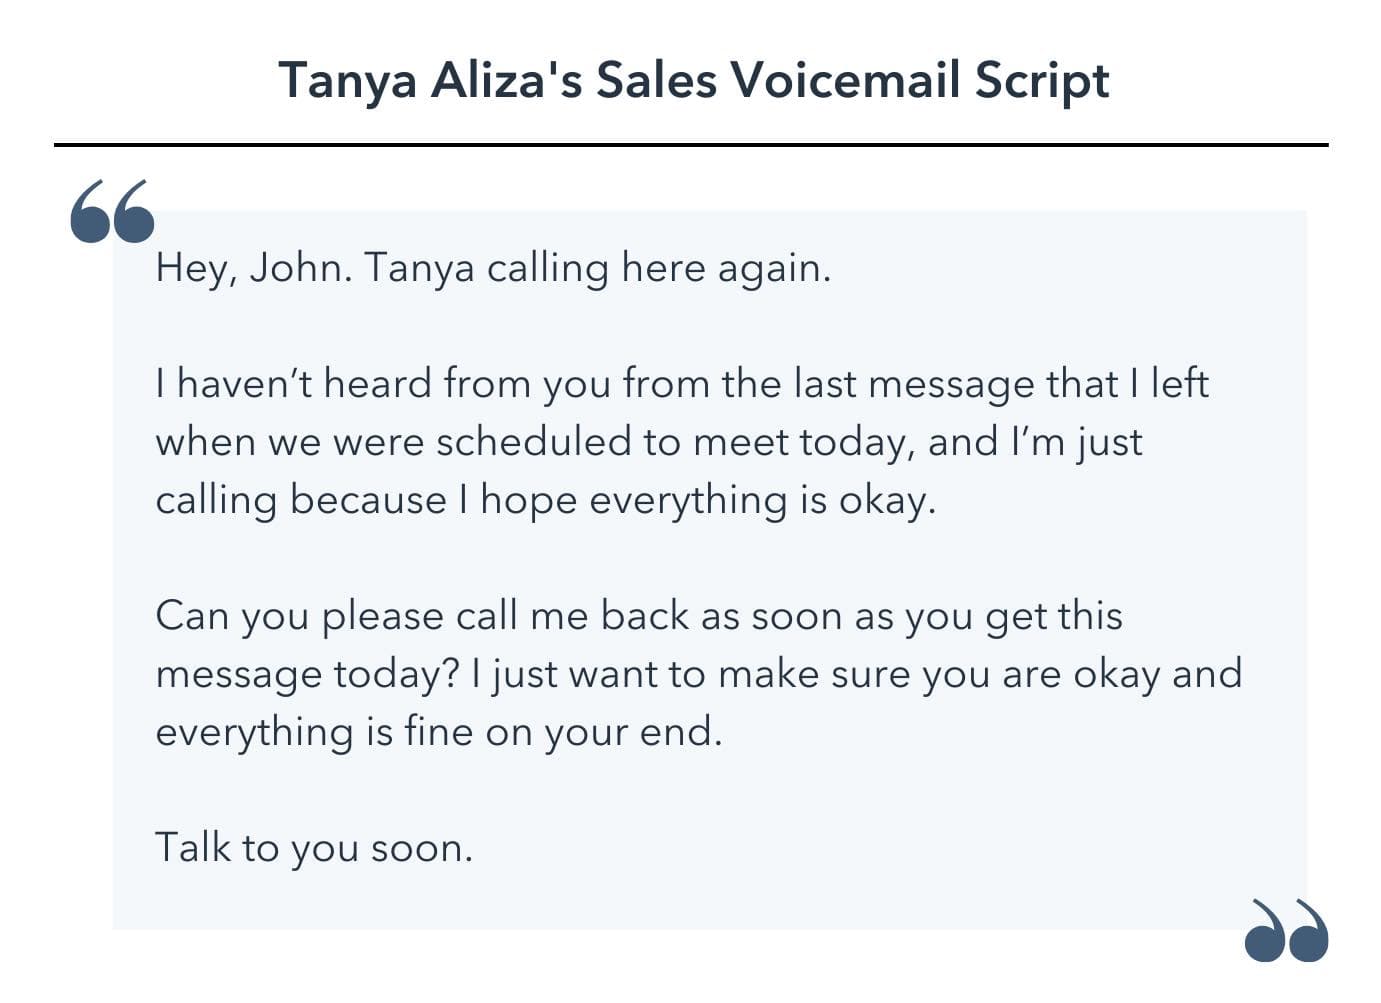 Hey, John. Tanya calling here again. I haven’t heard from you from the last message that I left when we were scheduled to meet today, and I’m just calling because I hope everything is okay. Can you please call me back as soon as you get this message today? I just want to make sure you are okay and everything is fine on your end. Talk to you soon.